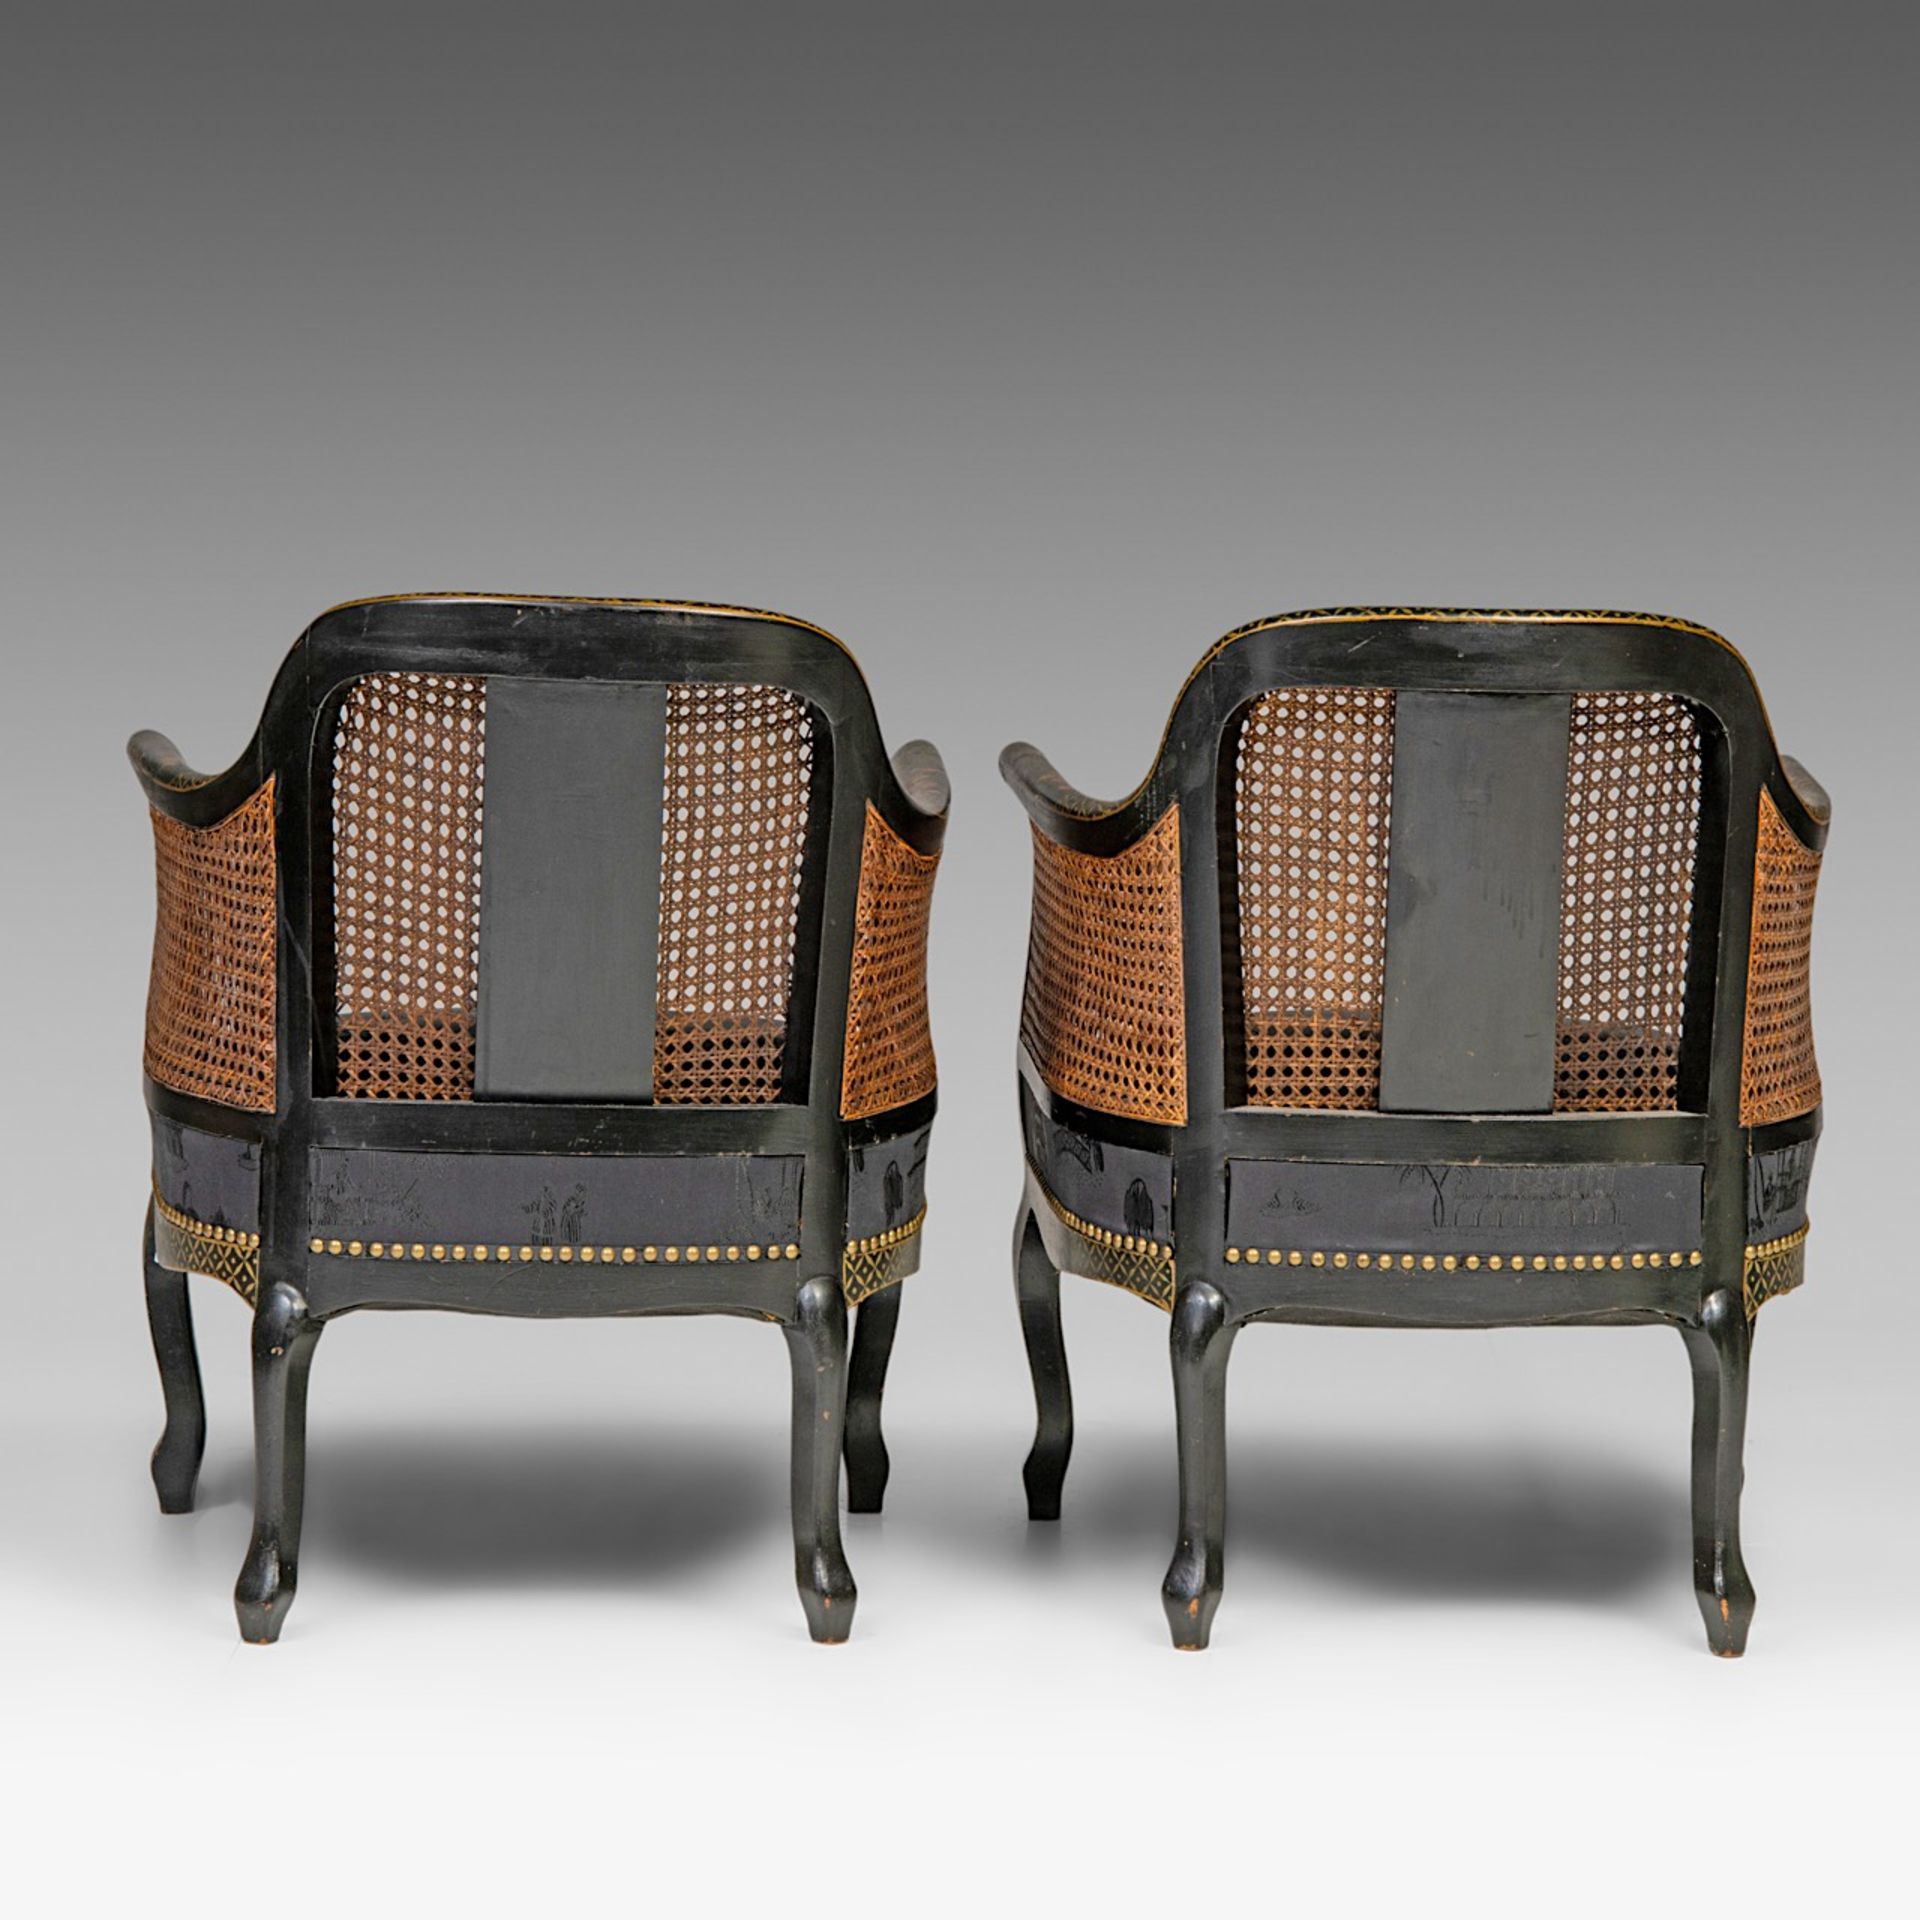 Two sets of handpainted Japonisme armchairs, with wicker panels, signed, H total 84 cm - H seat 36 c - Bild 9 aus 12